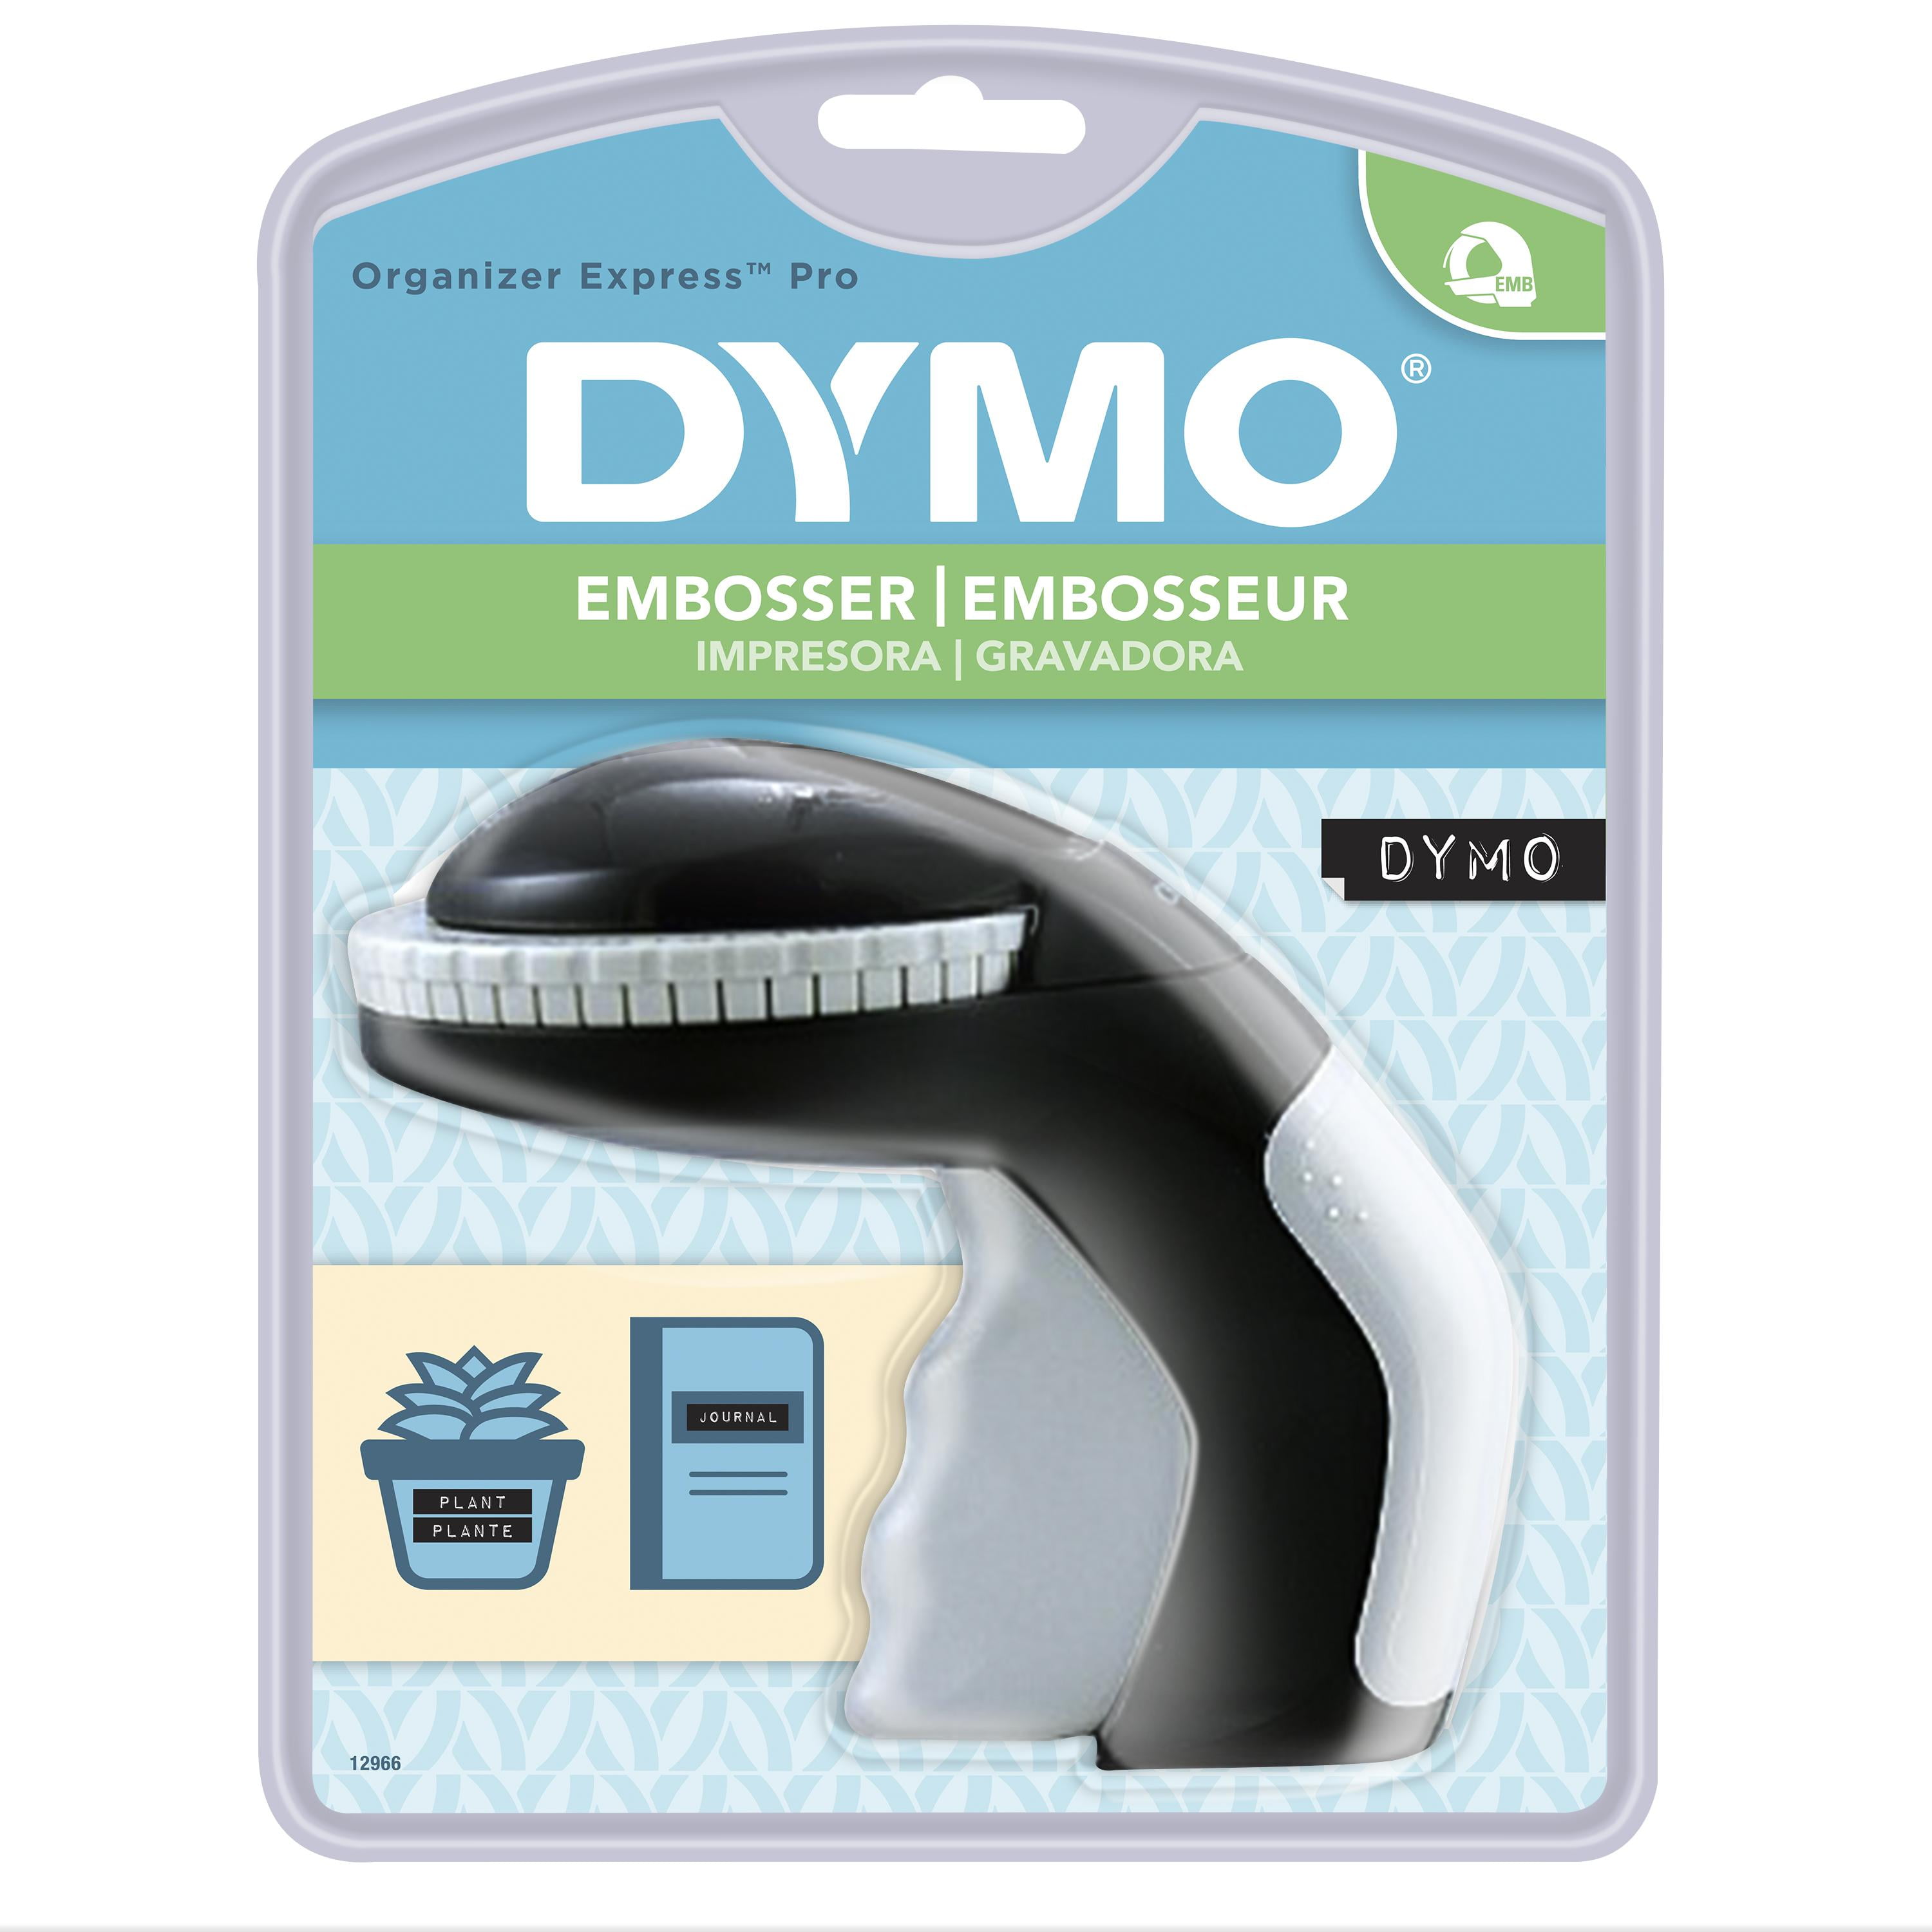 ✅✅✅ Embossing Label Maker with 3 DYMO Label Tapes New ✅✅✅ 